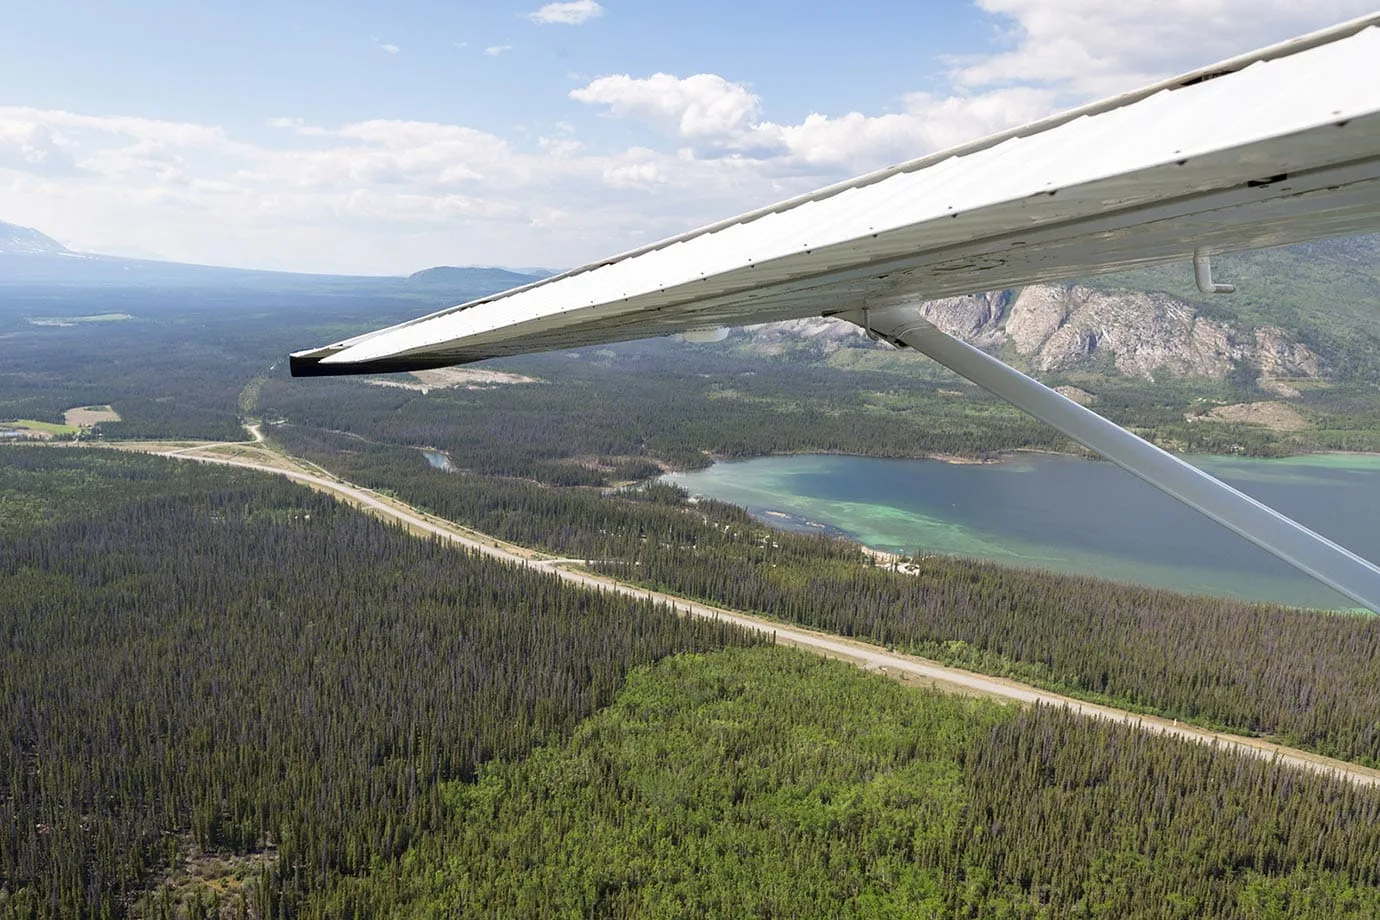 Flying over Haines Junction, Canada